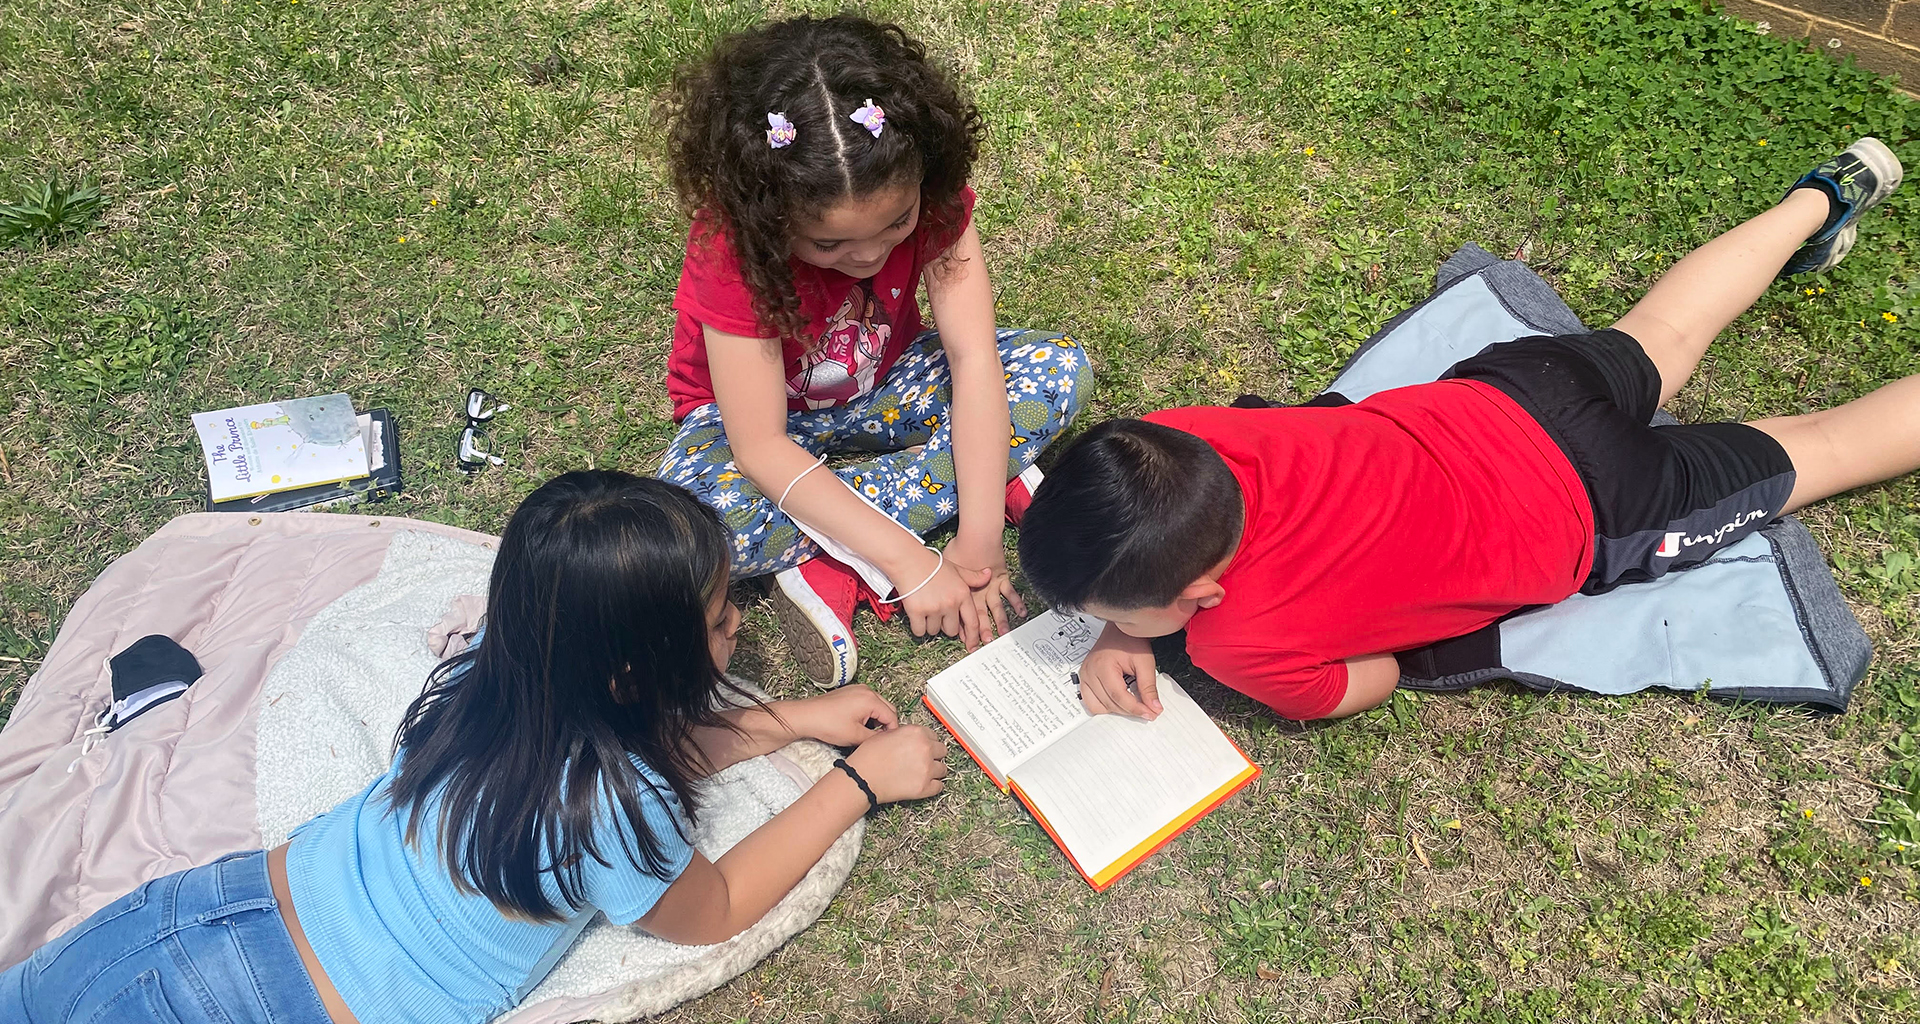 Three students in the grass read a book together